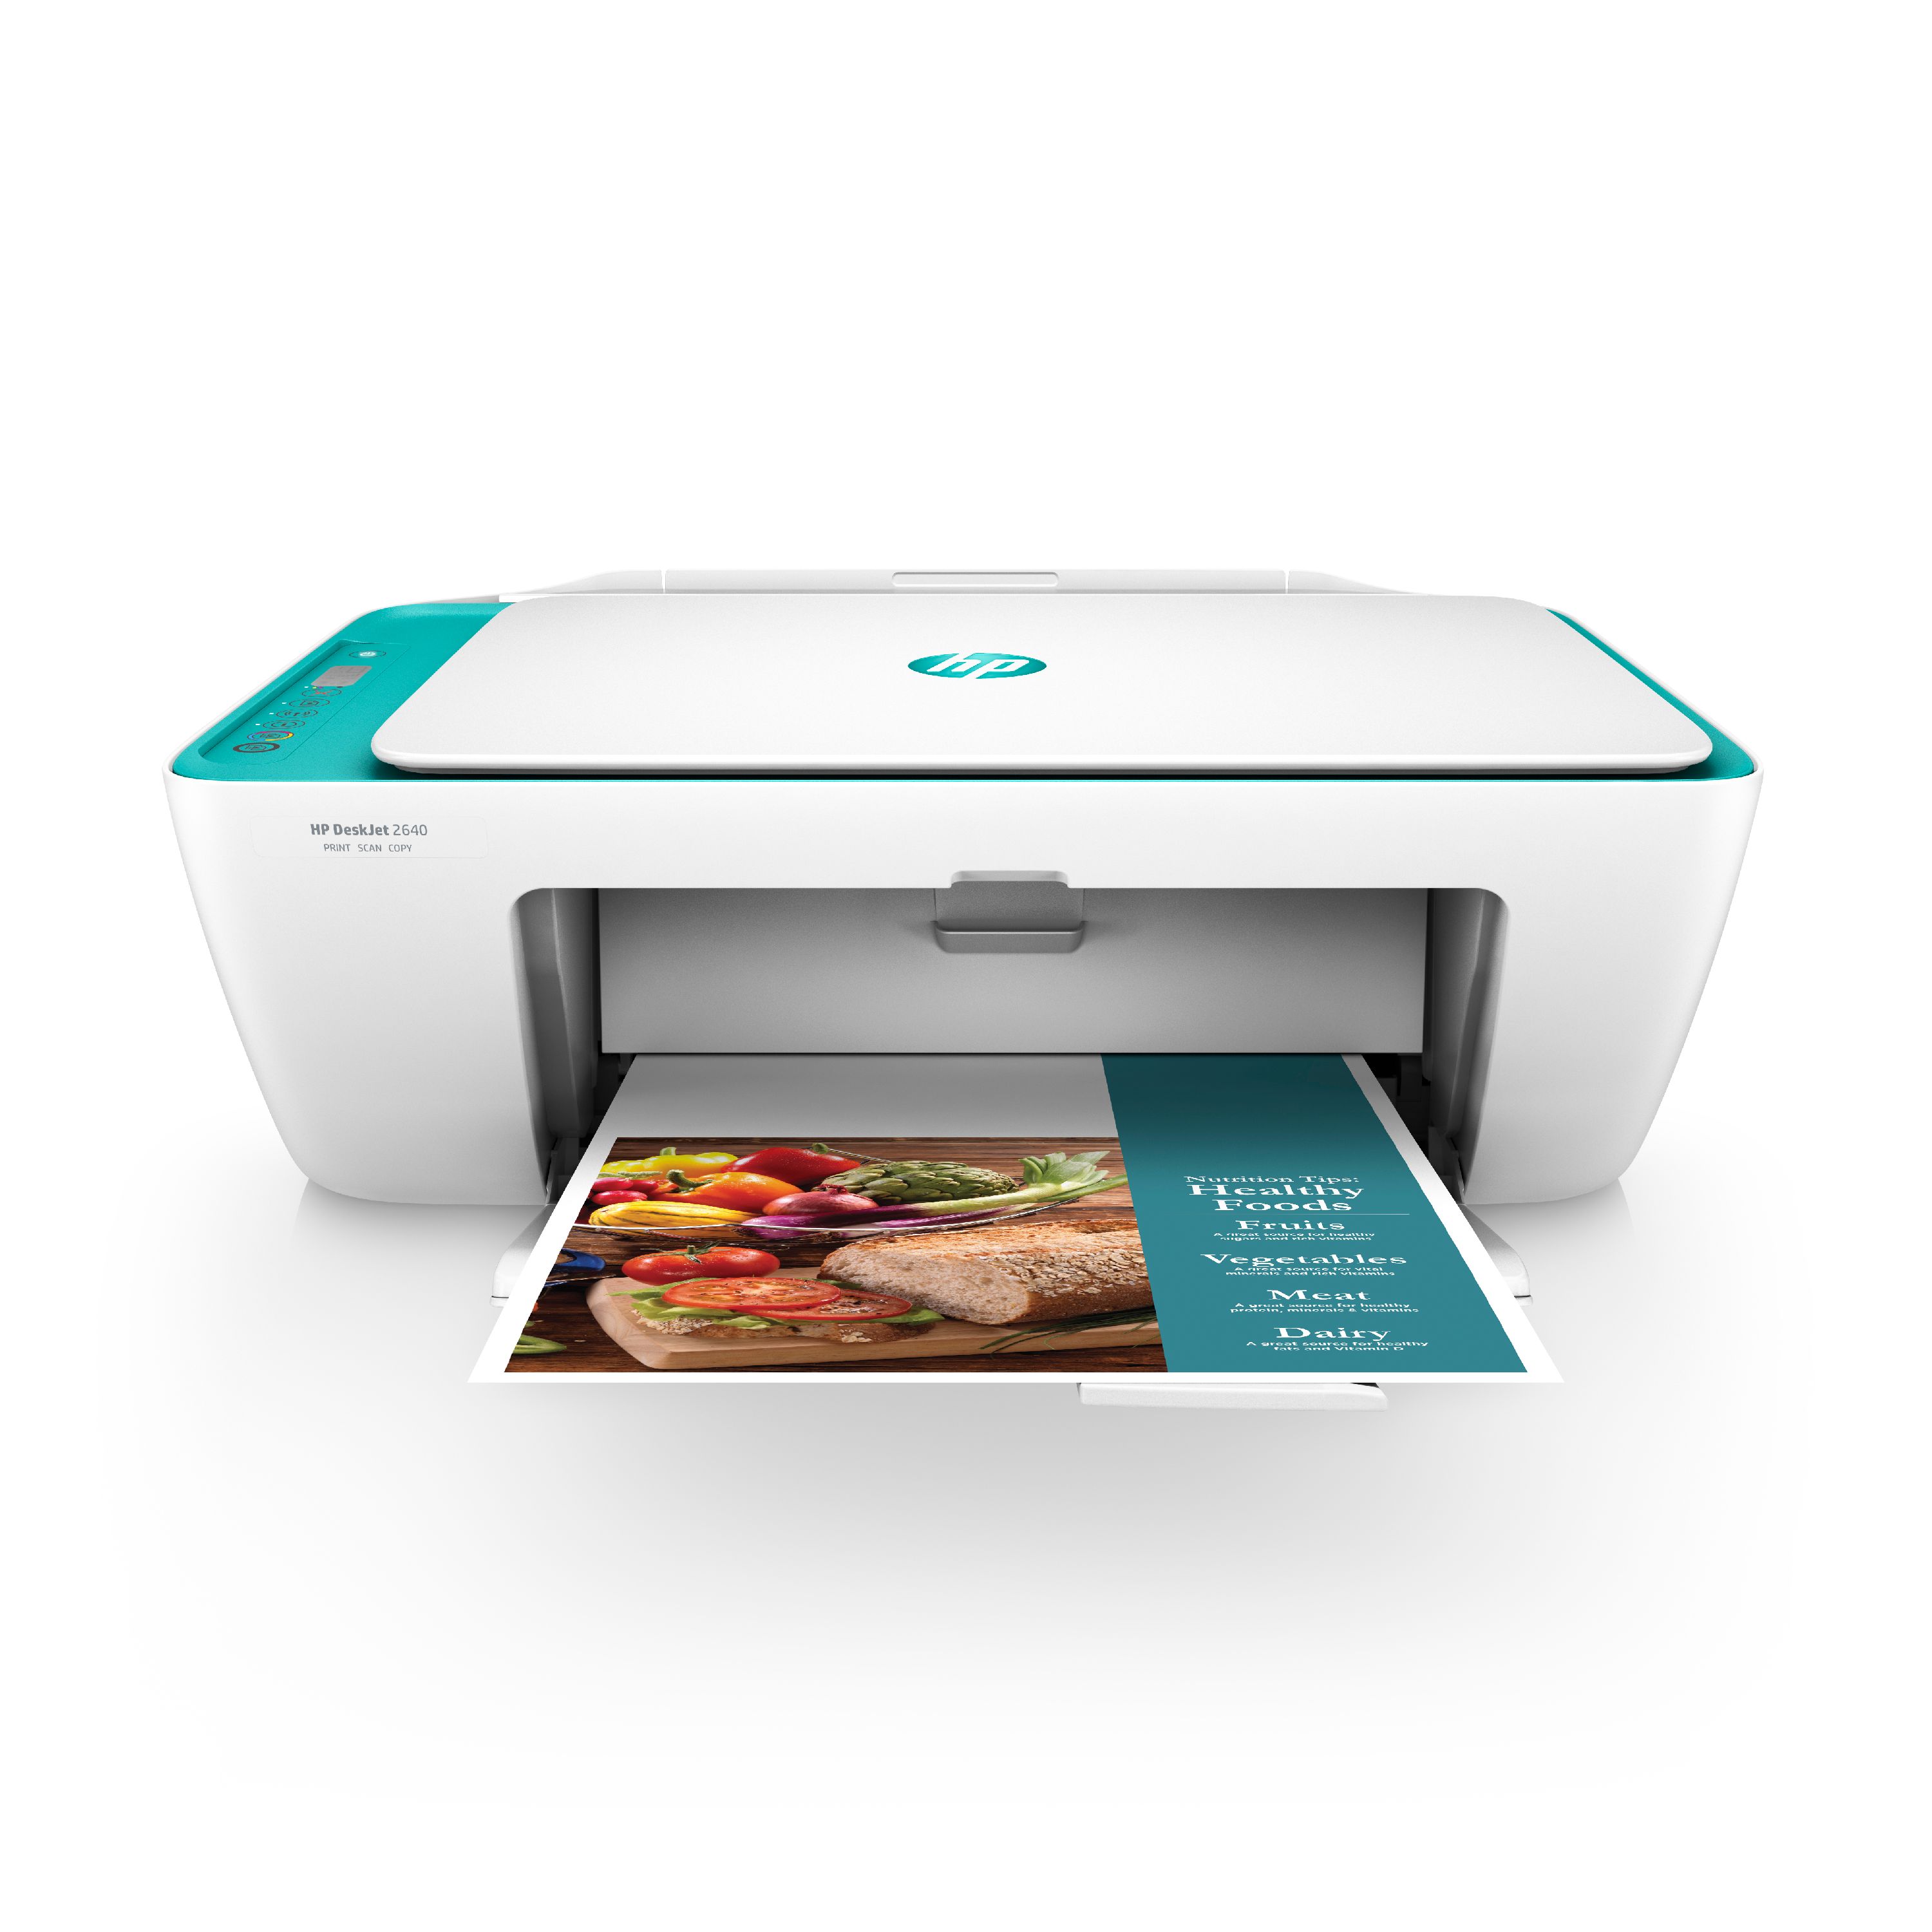 HP DeskJet 2640 All-in-One Wireless Color Inkjet Printer (White/Teal) - Instant Ink Ready - image 1 of 6